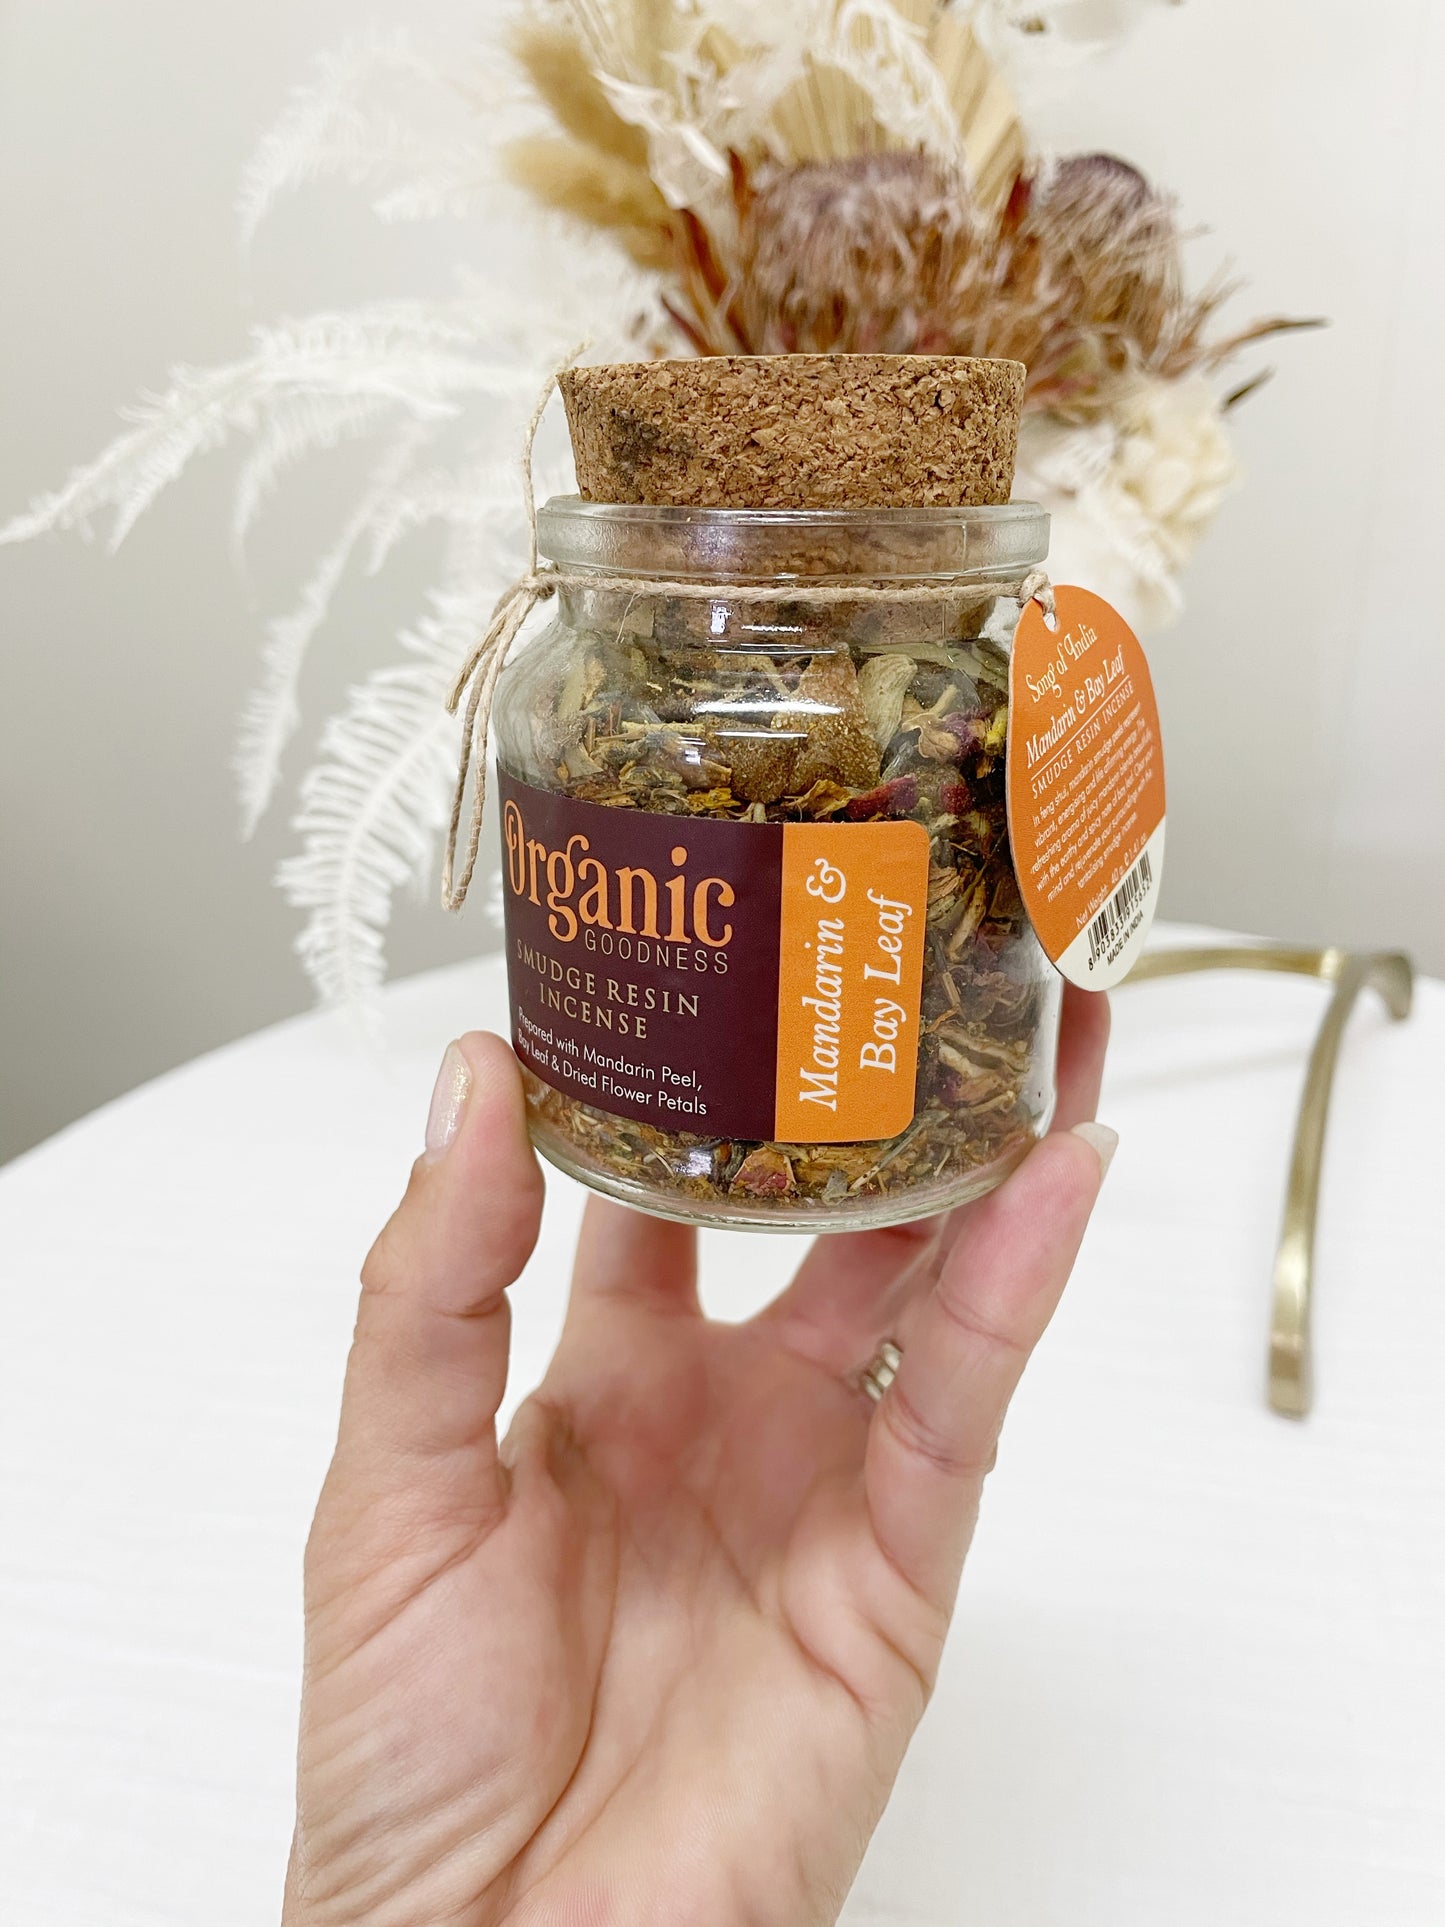 ORGANIC GOODNESS SMUDGE RESIN INCENSE